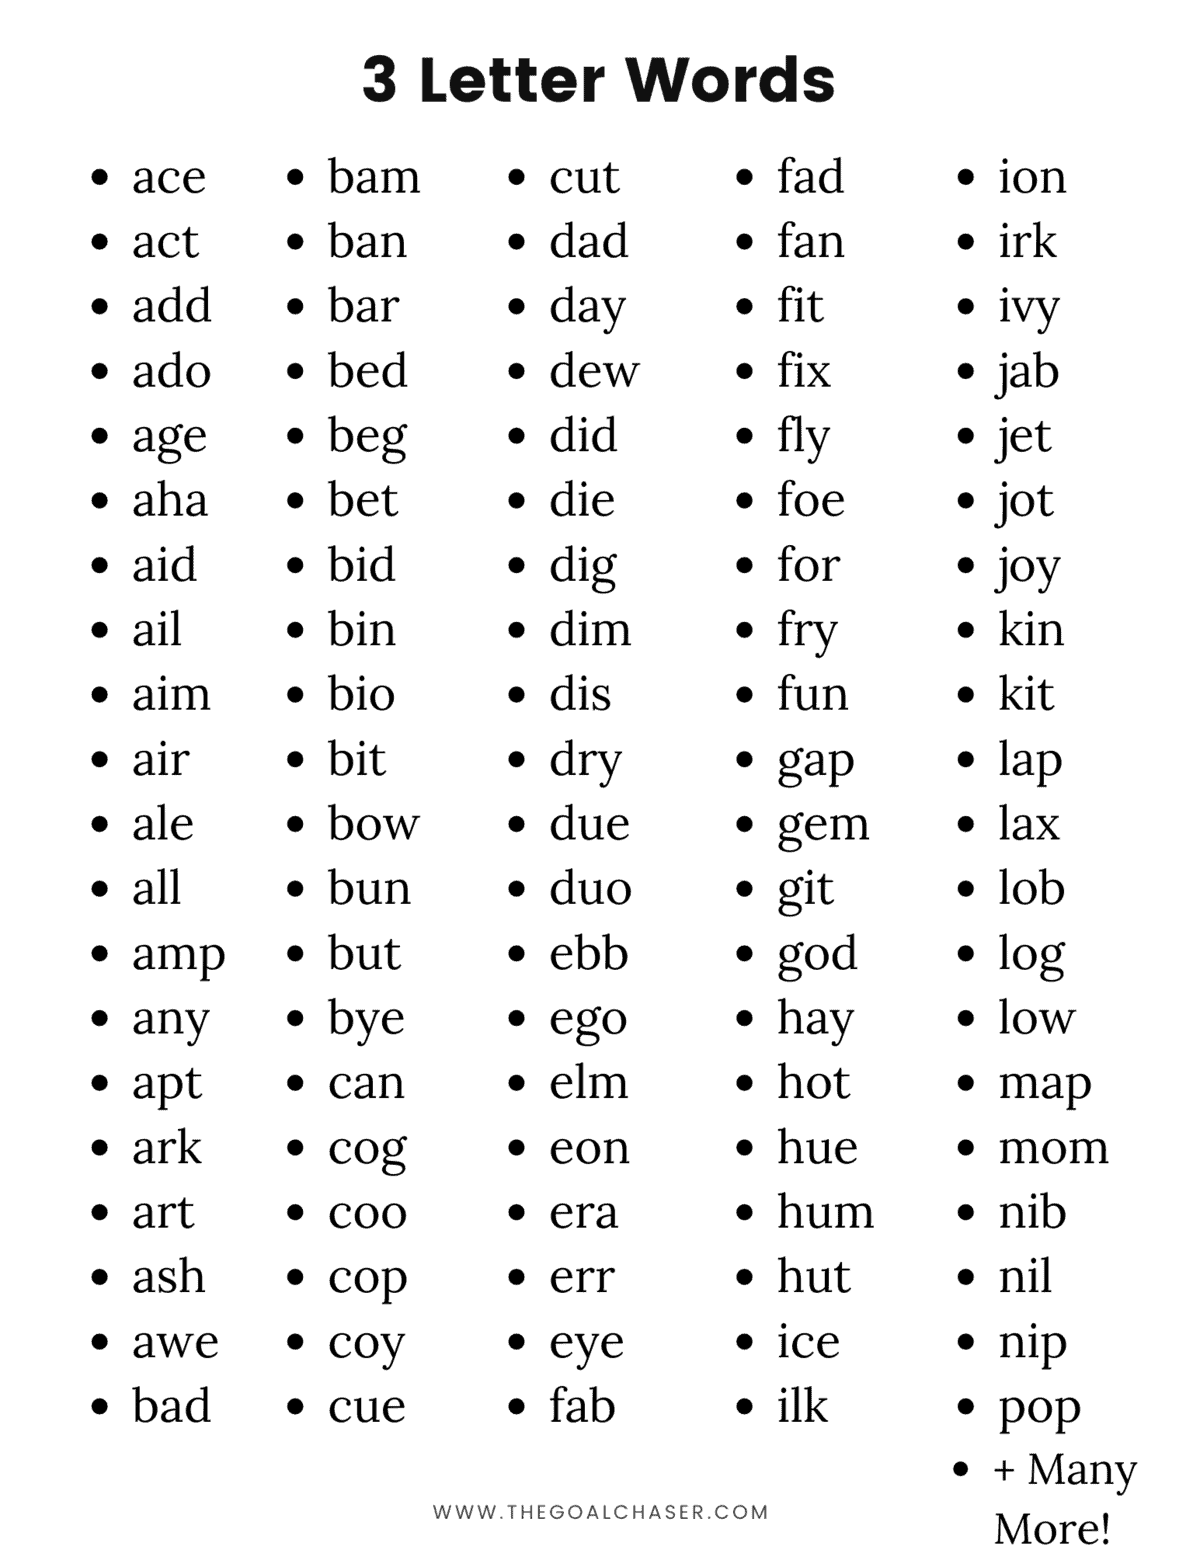 List Of 3 Letter Words In English Pdf